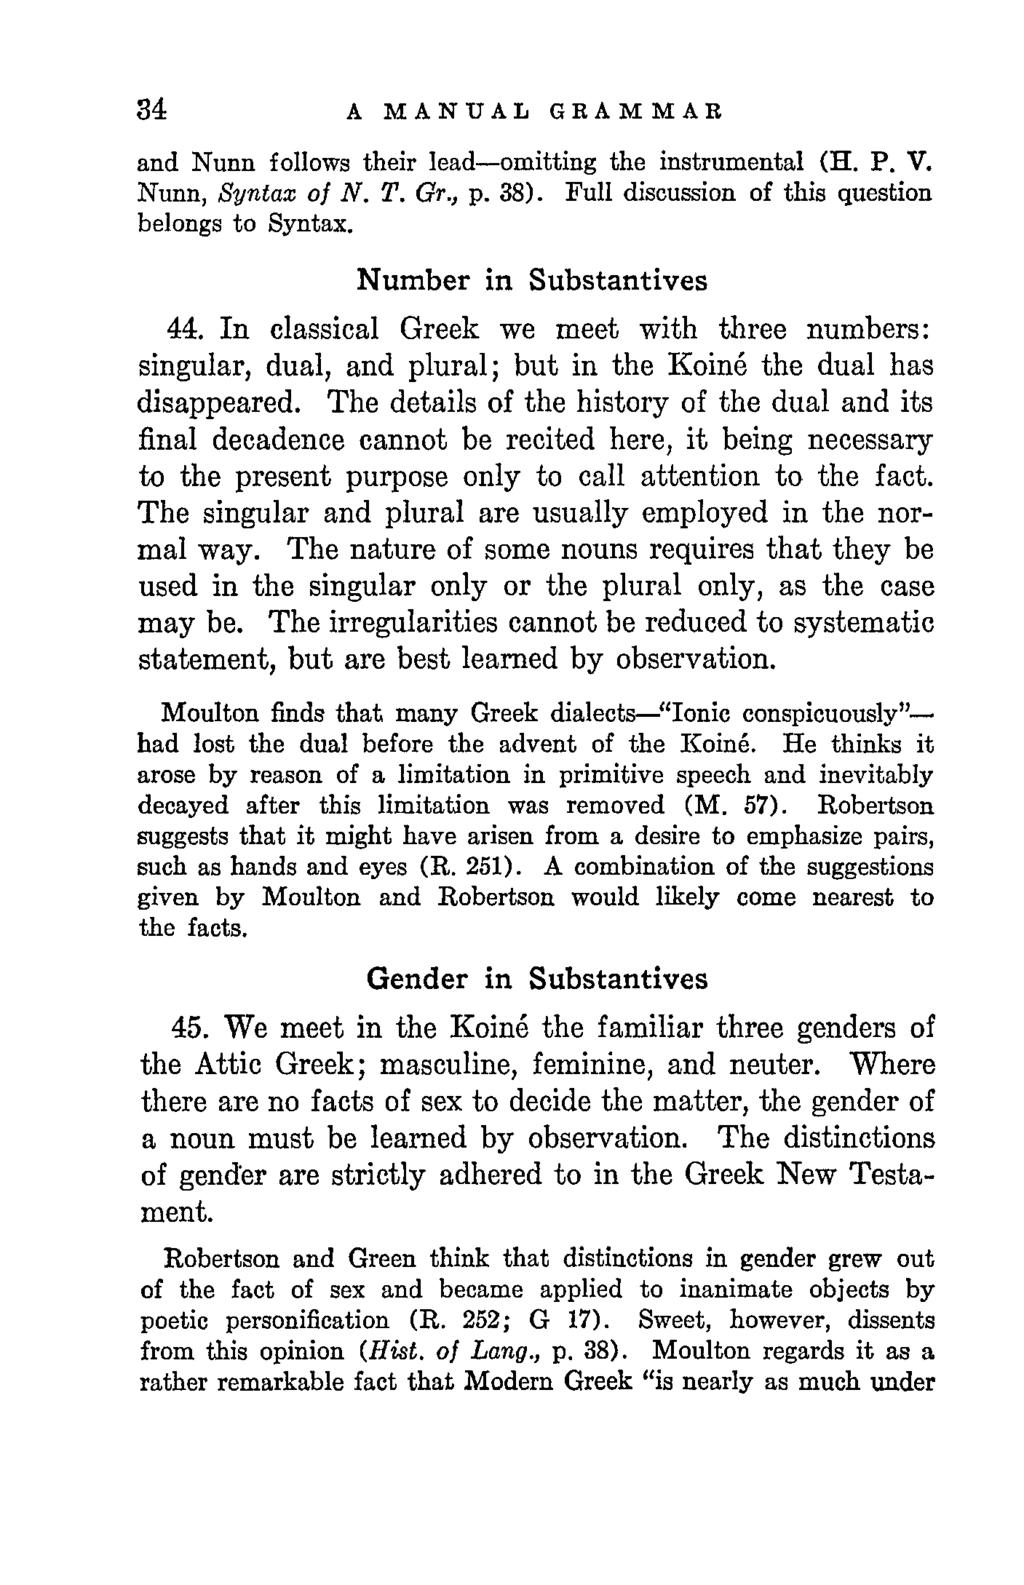 34 A MANUAL GRAMMAR and Nunn follows their lead omitting the instrumental (H. P. V. Nunn, Syntax of N. T. Gr., p. 38). Full discussion of this question belongs to Syntax. Number in Substantives 44.